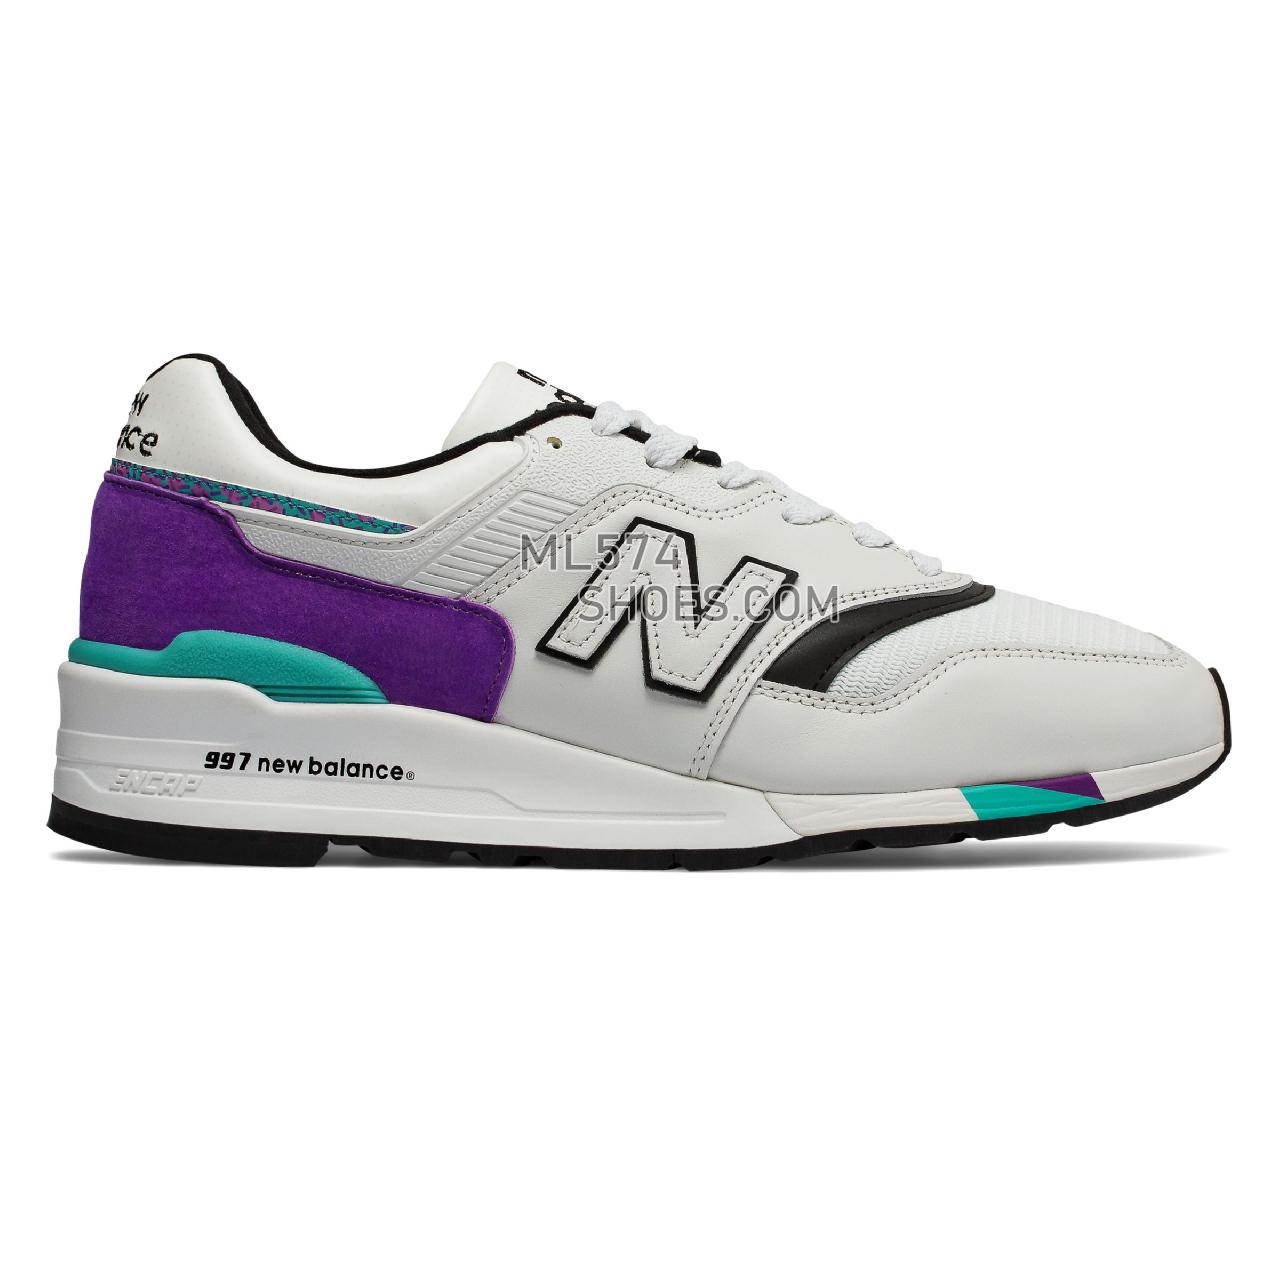 New Balance 997 Made in US - Men's 997 - Classic Light Grey Marl with Purple - M997WEA